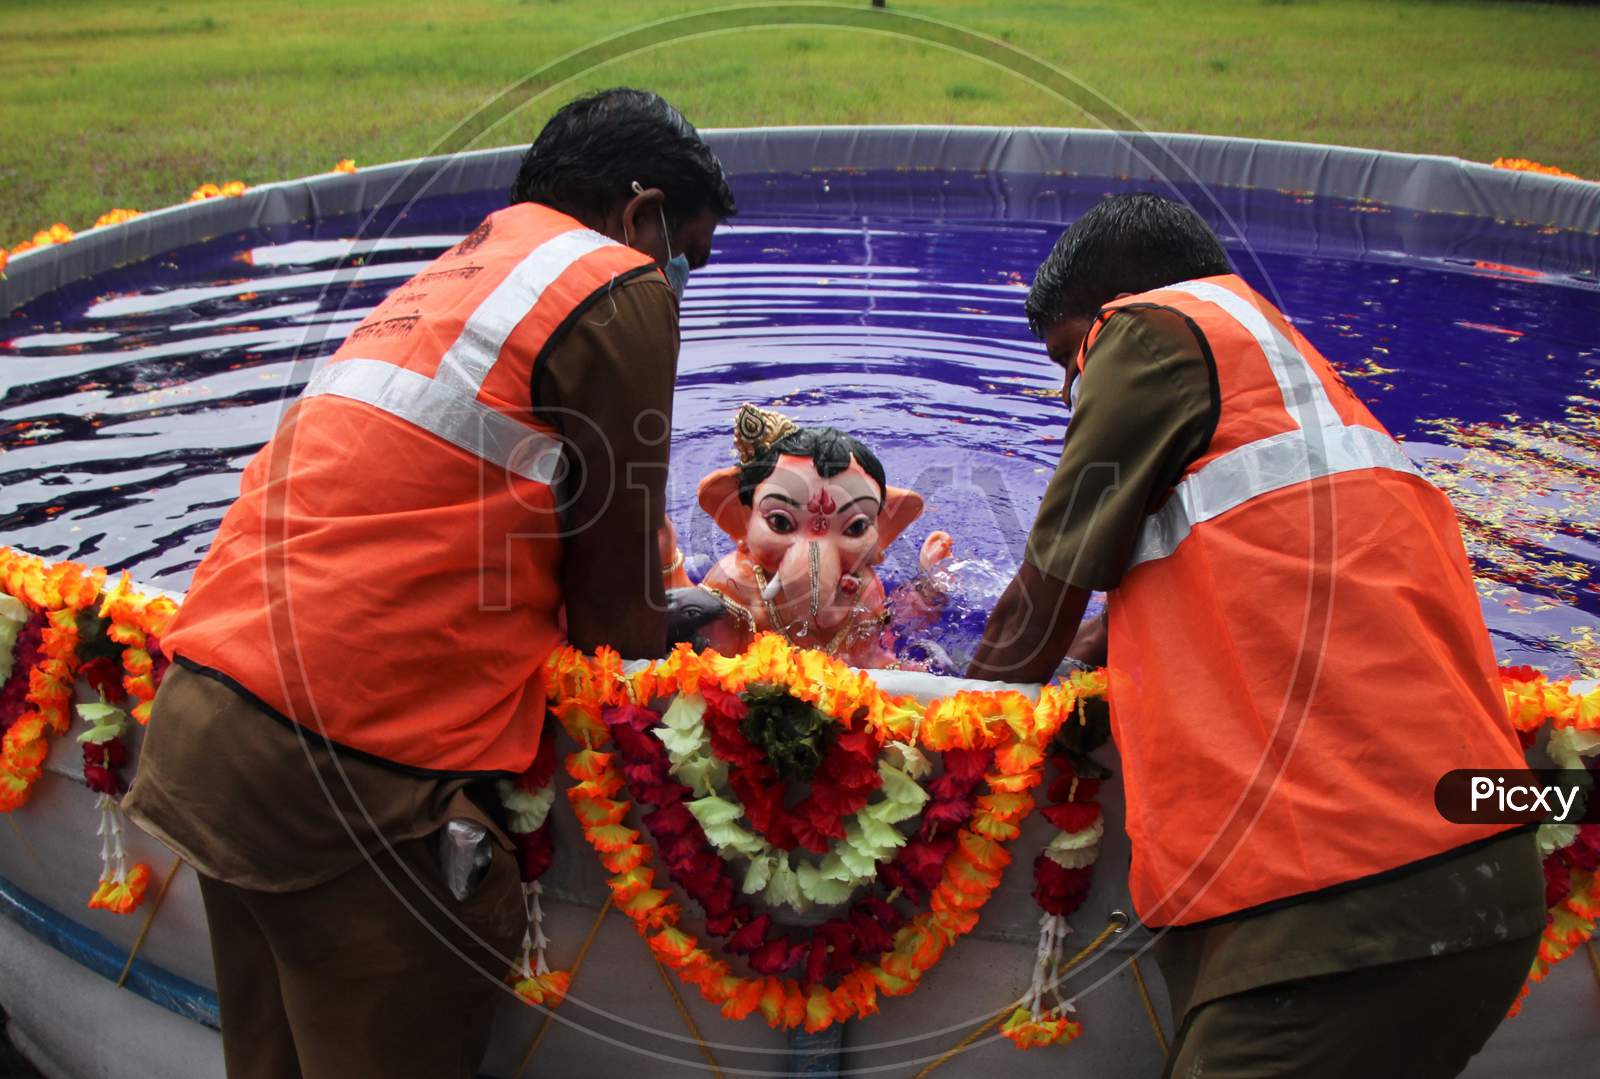 Bmc people immerses an idol of the Hindu god Ganesh, the deity of prosperity, in an artificial pond during the Ganesh Chaturthi festival in Mumbai, India, August 23, 2020.